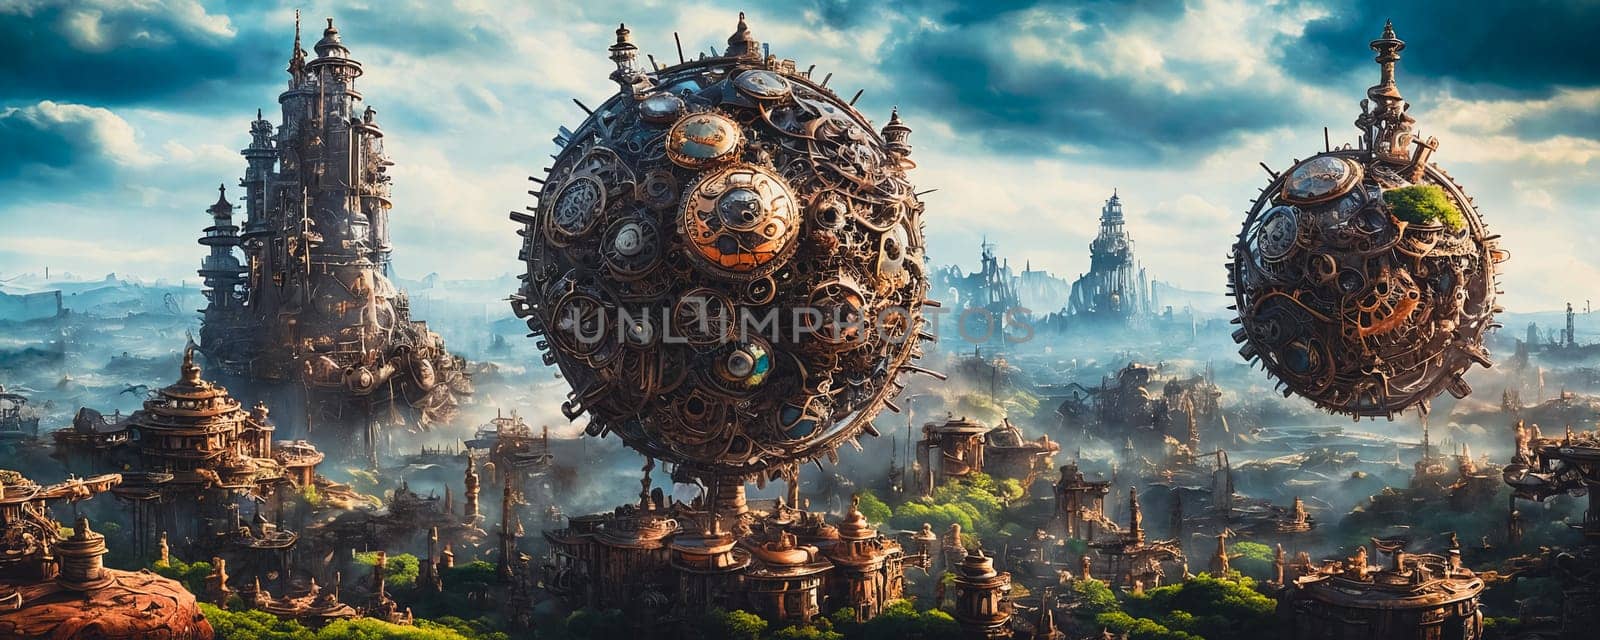 Clockwork Steampunk Planet. A planet that blends fantasy and machinery, featuring colossal, intricately detailed clockwork structures, towering gears, and fantastical steam-powered landscapes under a sky filled with metallic clouds and mechanical wonders